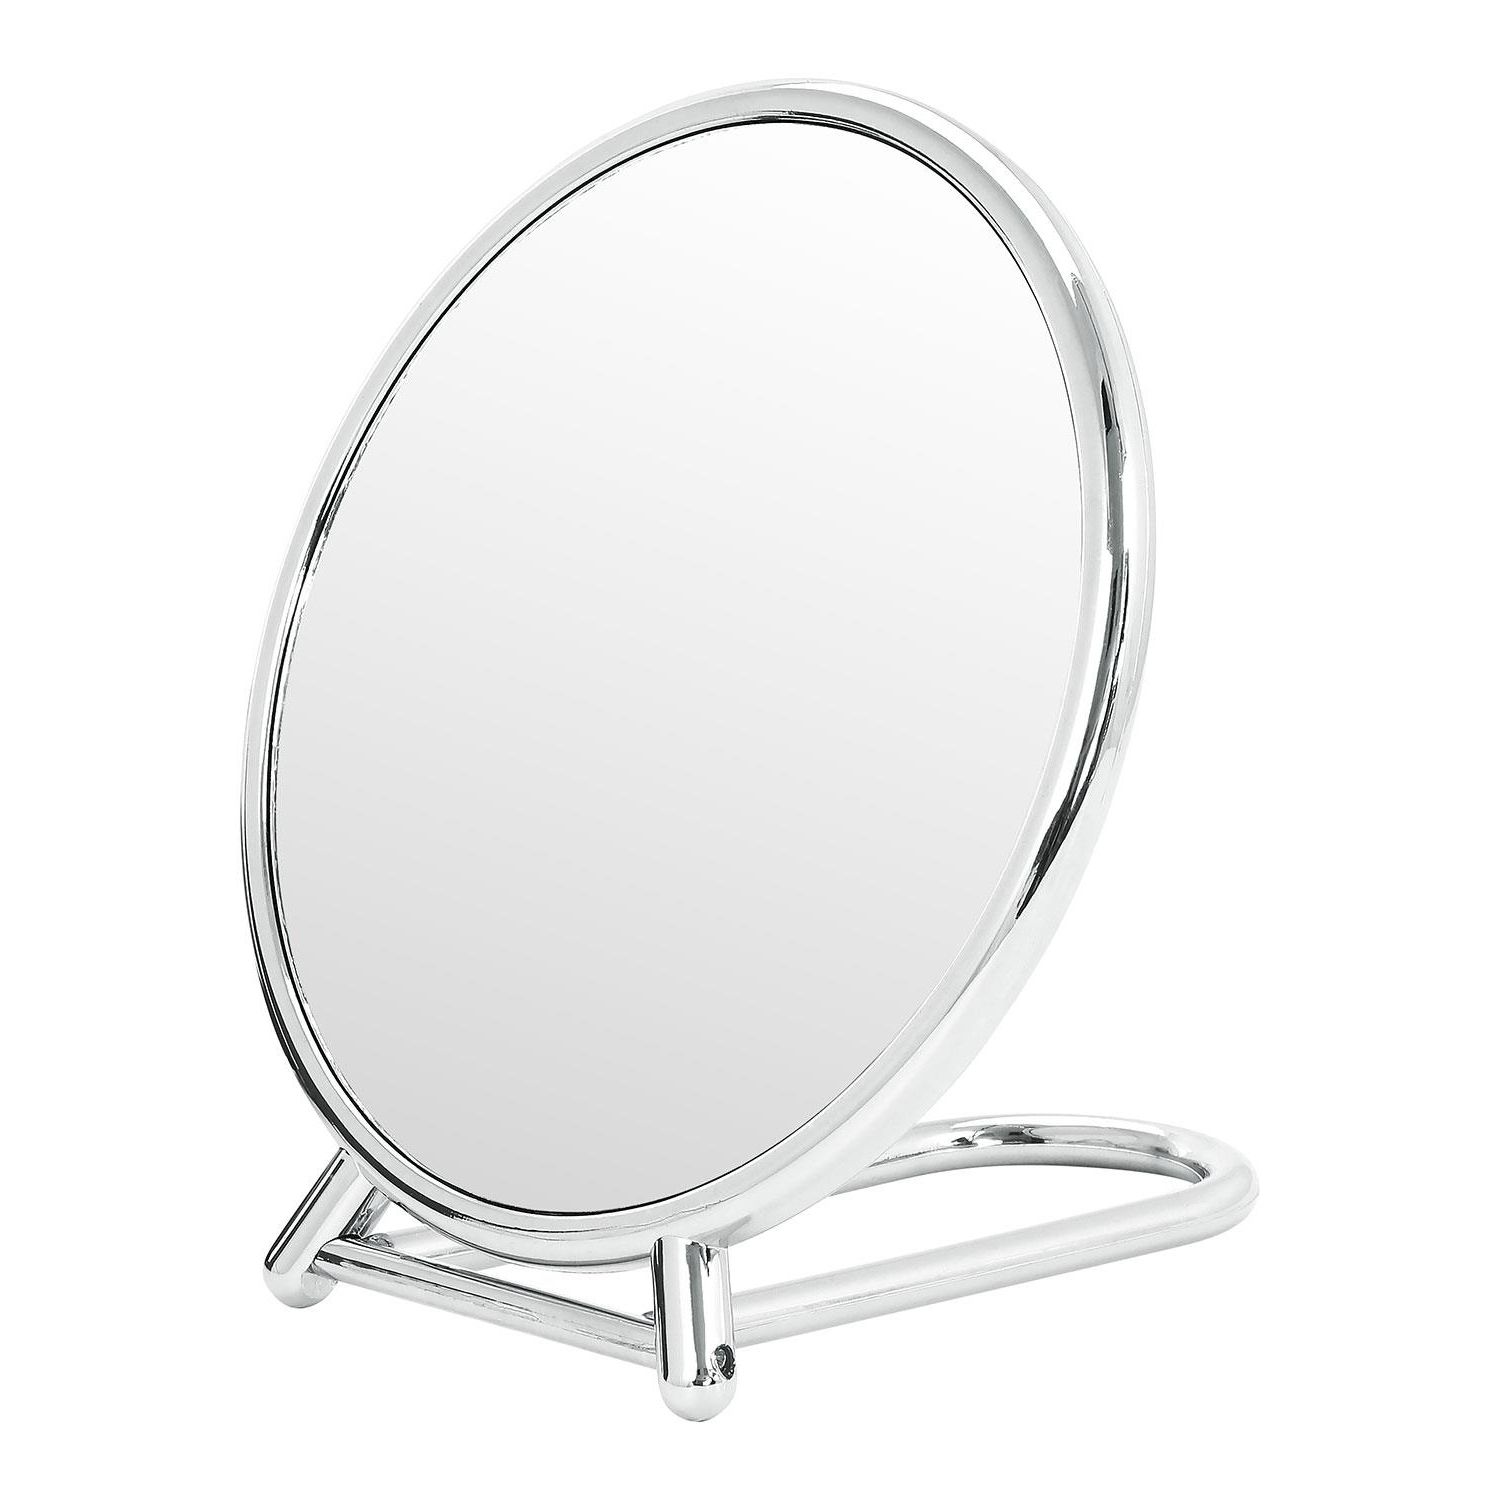 Most Recent Single Sided Chrome Makeup Stand Mirrors Within Wall Mounted Standing Bathroom Shaving Make Up Adjustable Chrome Round (View 14 of 15)